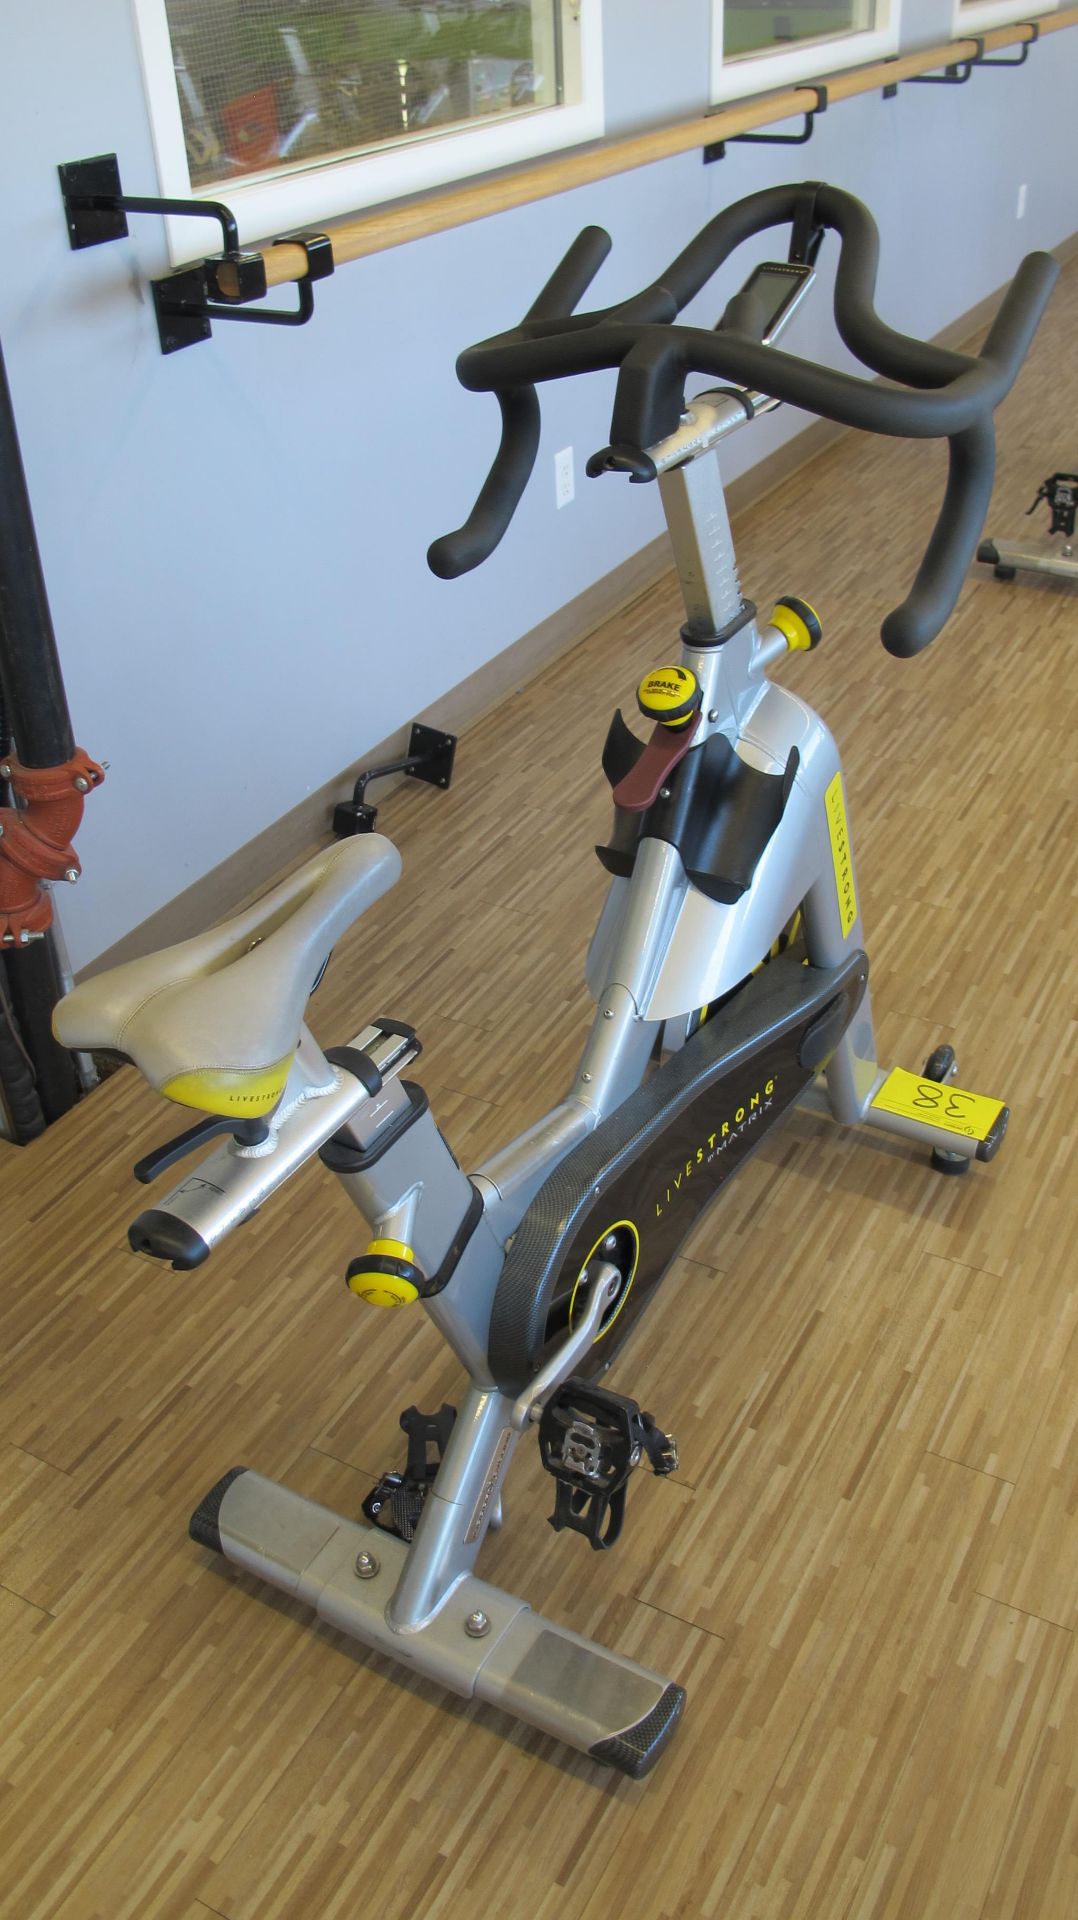 LIVESTRONG LS S-Series Class S Stationary Spin Bike, 'AS-IS', S/N: LASB0008034-111 - Image 8 of 10